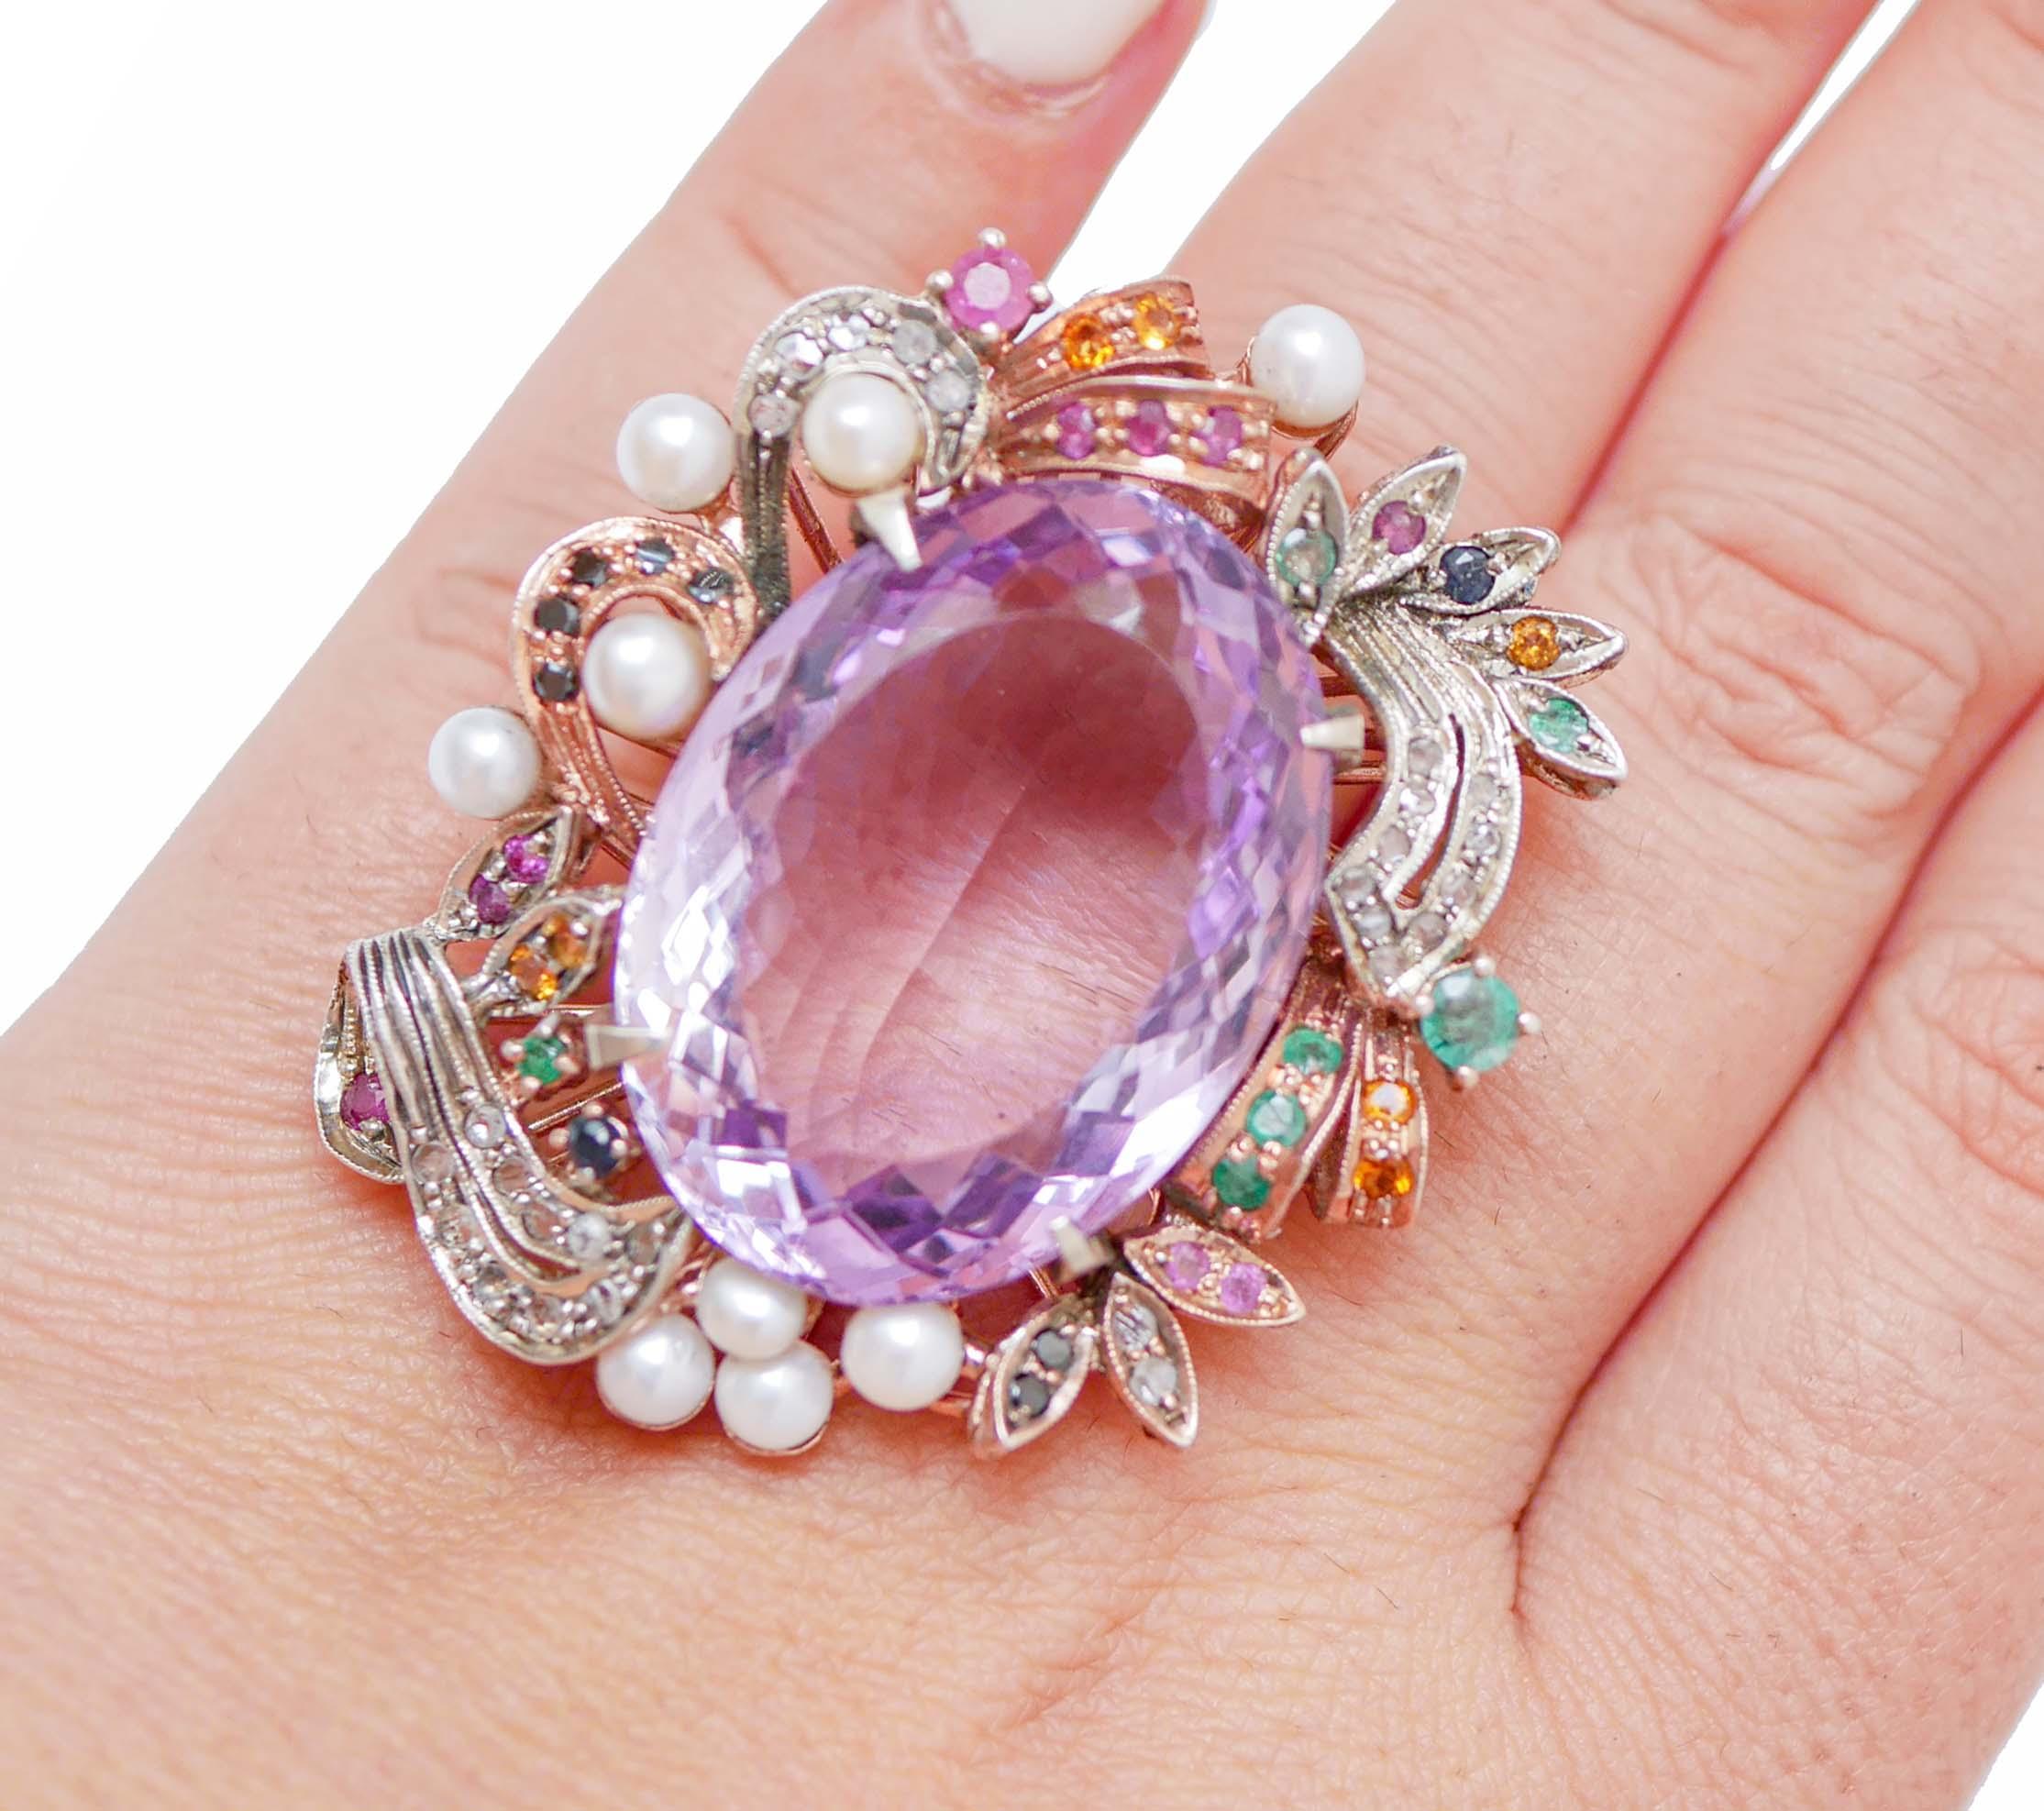 Mixed Cut Amethyst, Pearls, Stones, Rubies, Emeralds, Sapphires, Diamonds,  Ring. For Sale